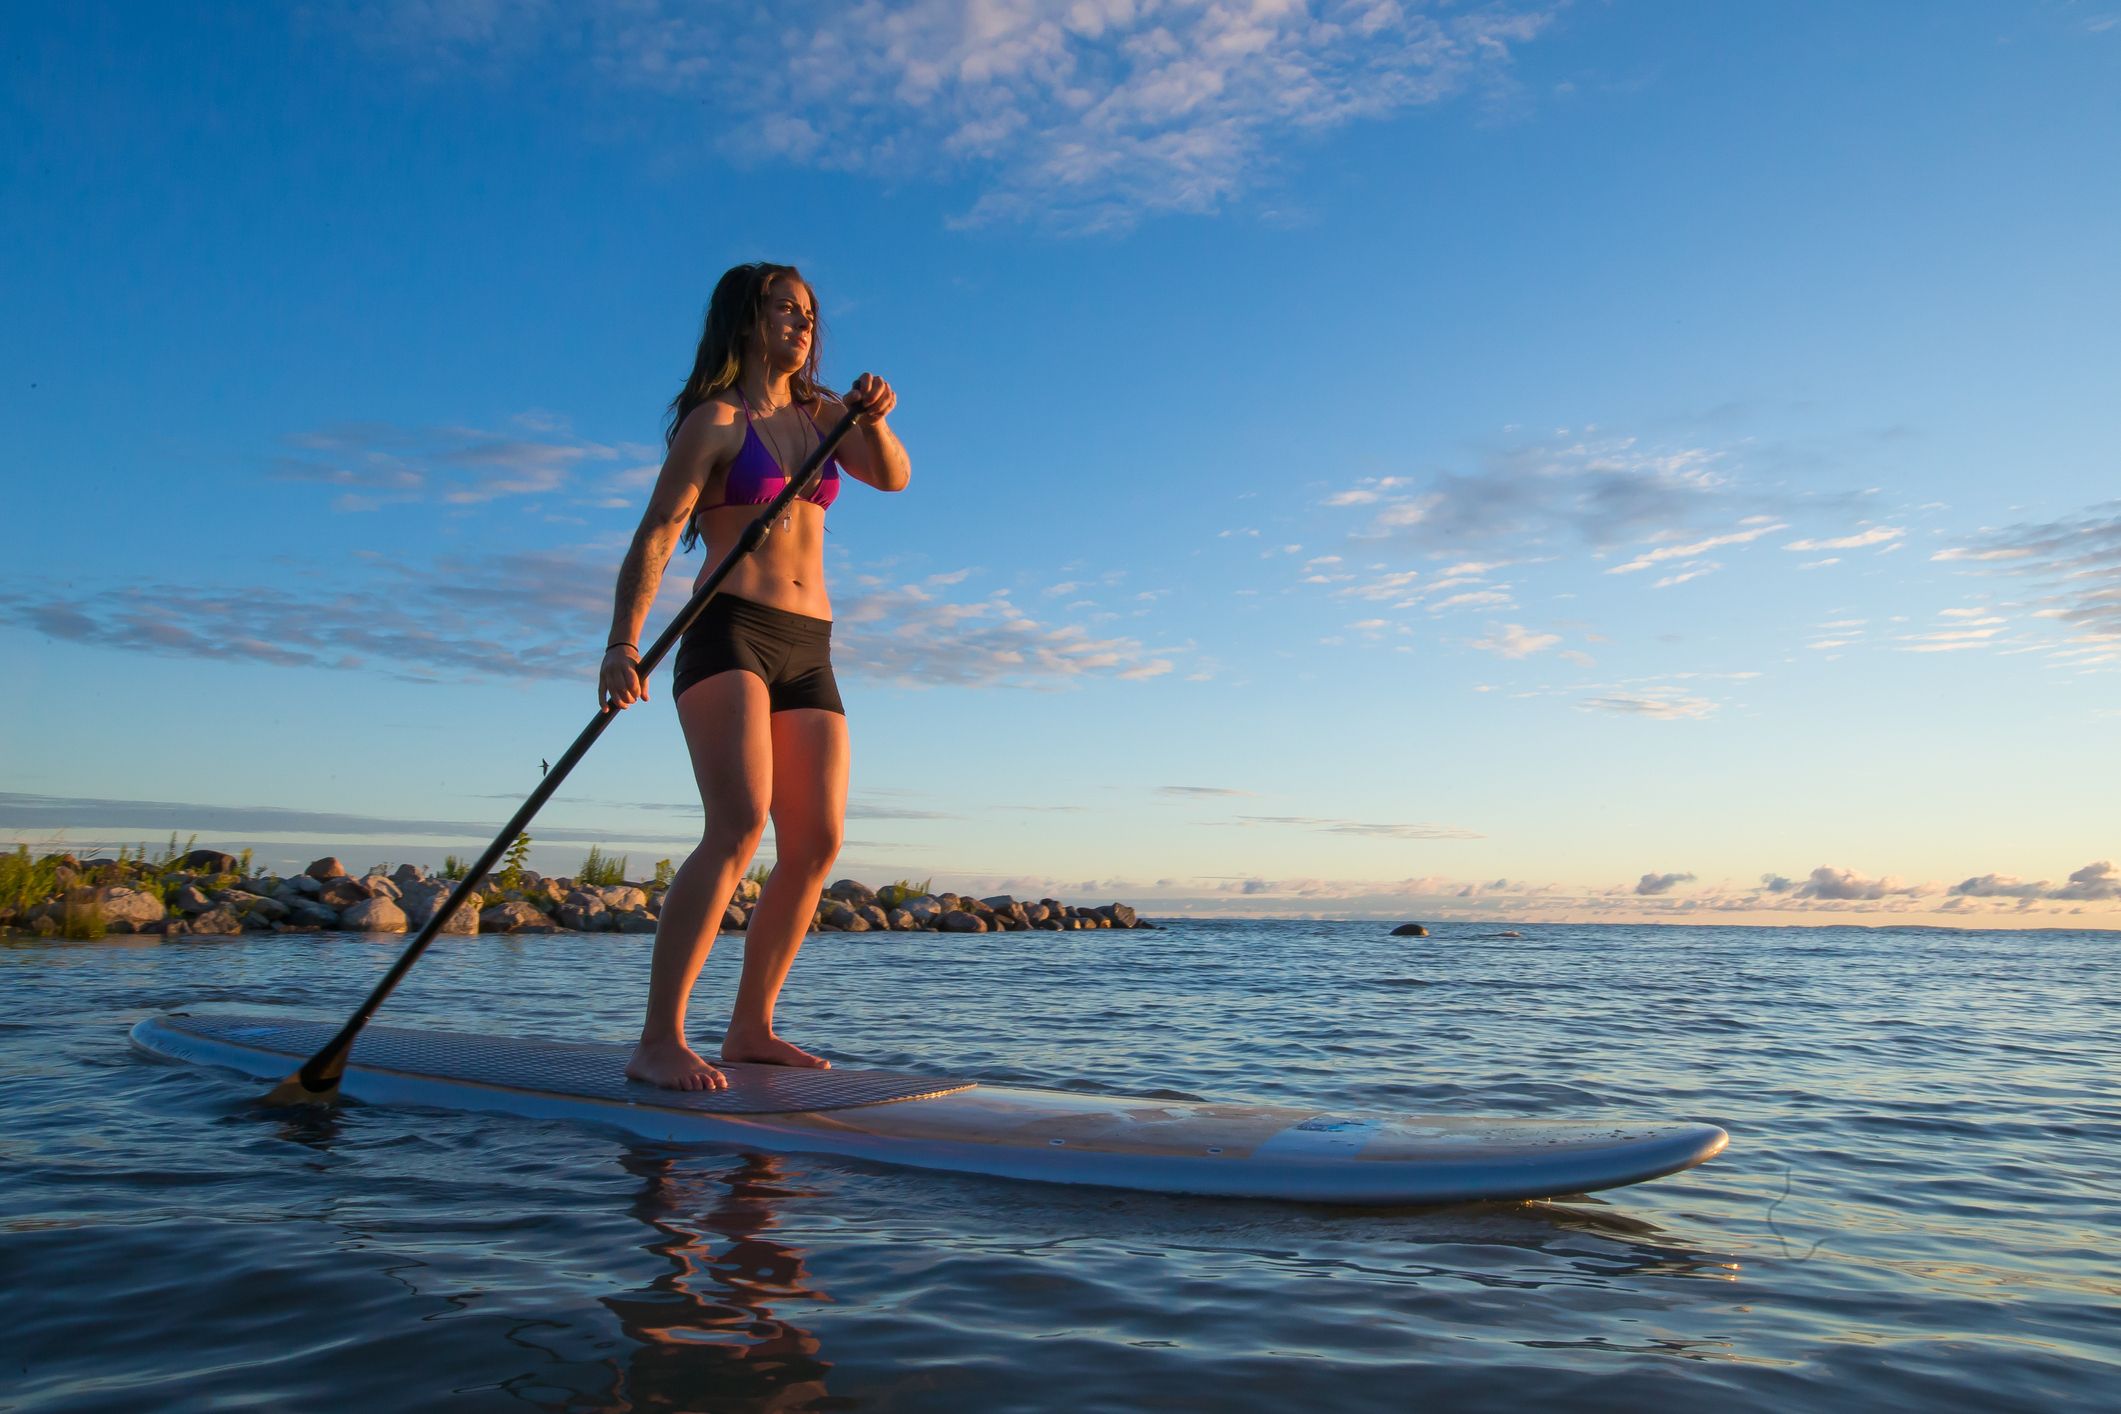 The Beginner’s Guide to Paddle Boarding, a Fun Way to Cross-Train This Summer